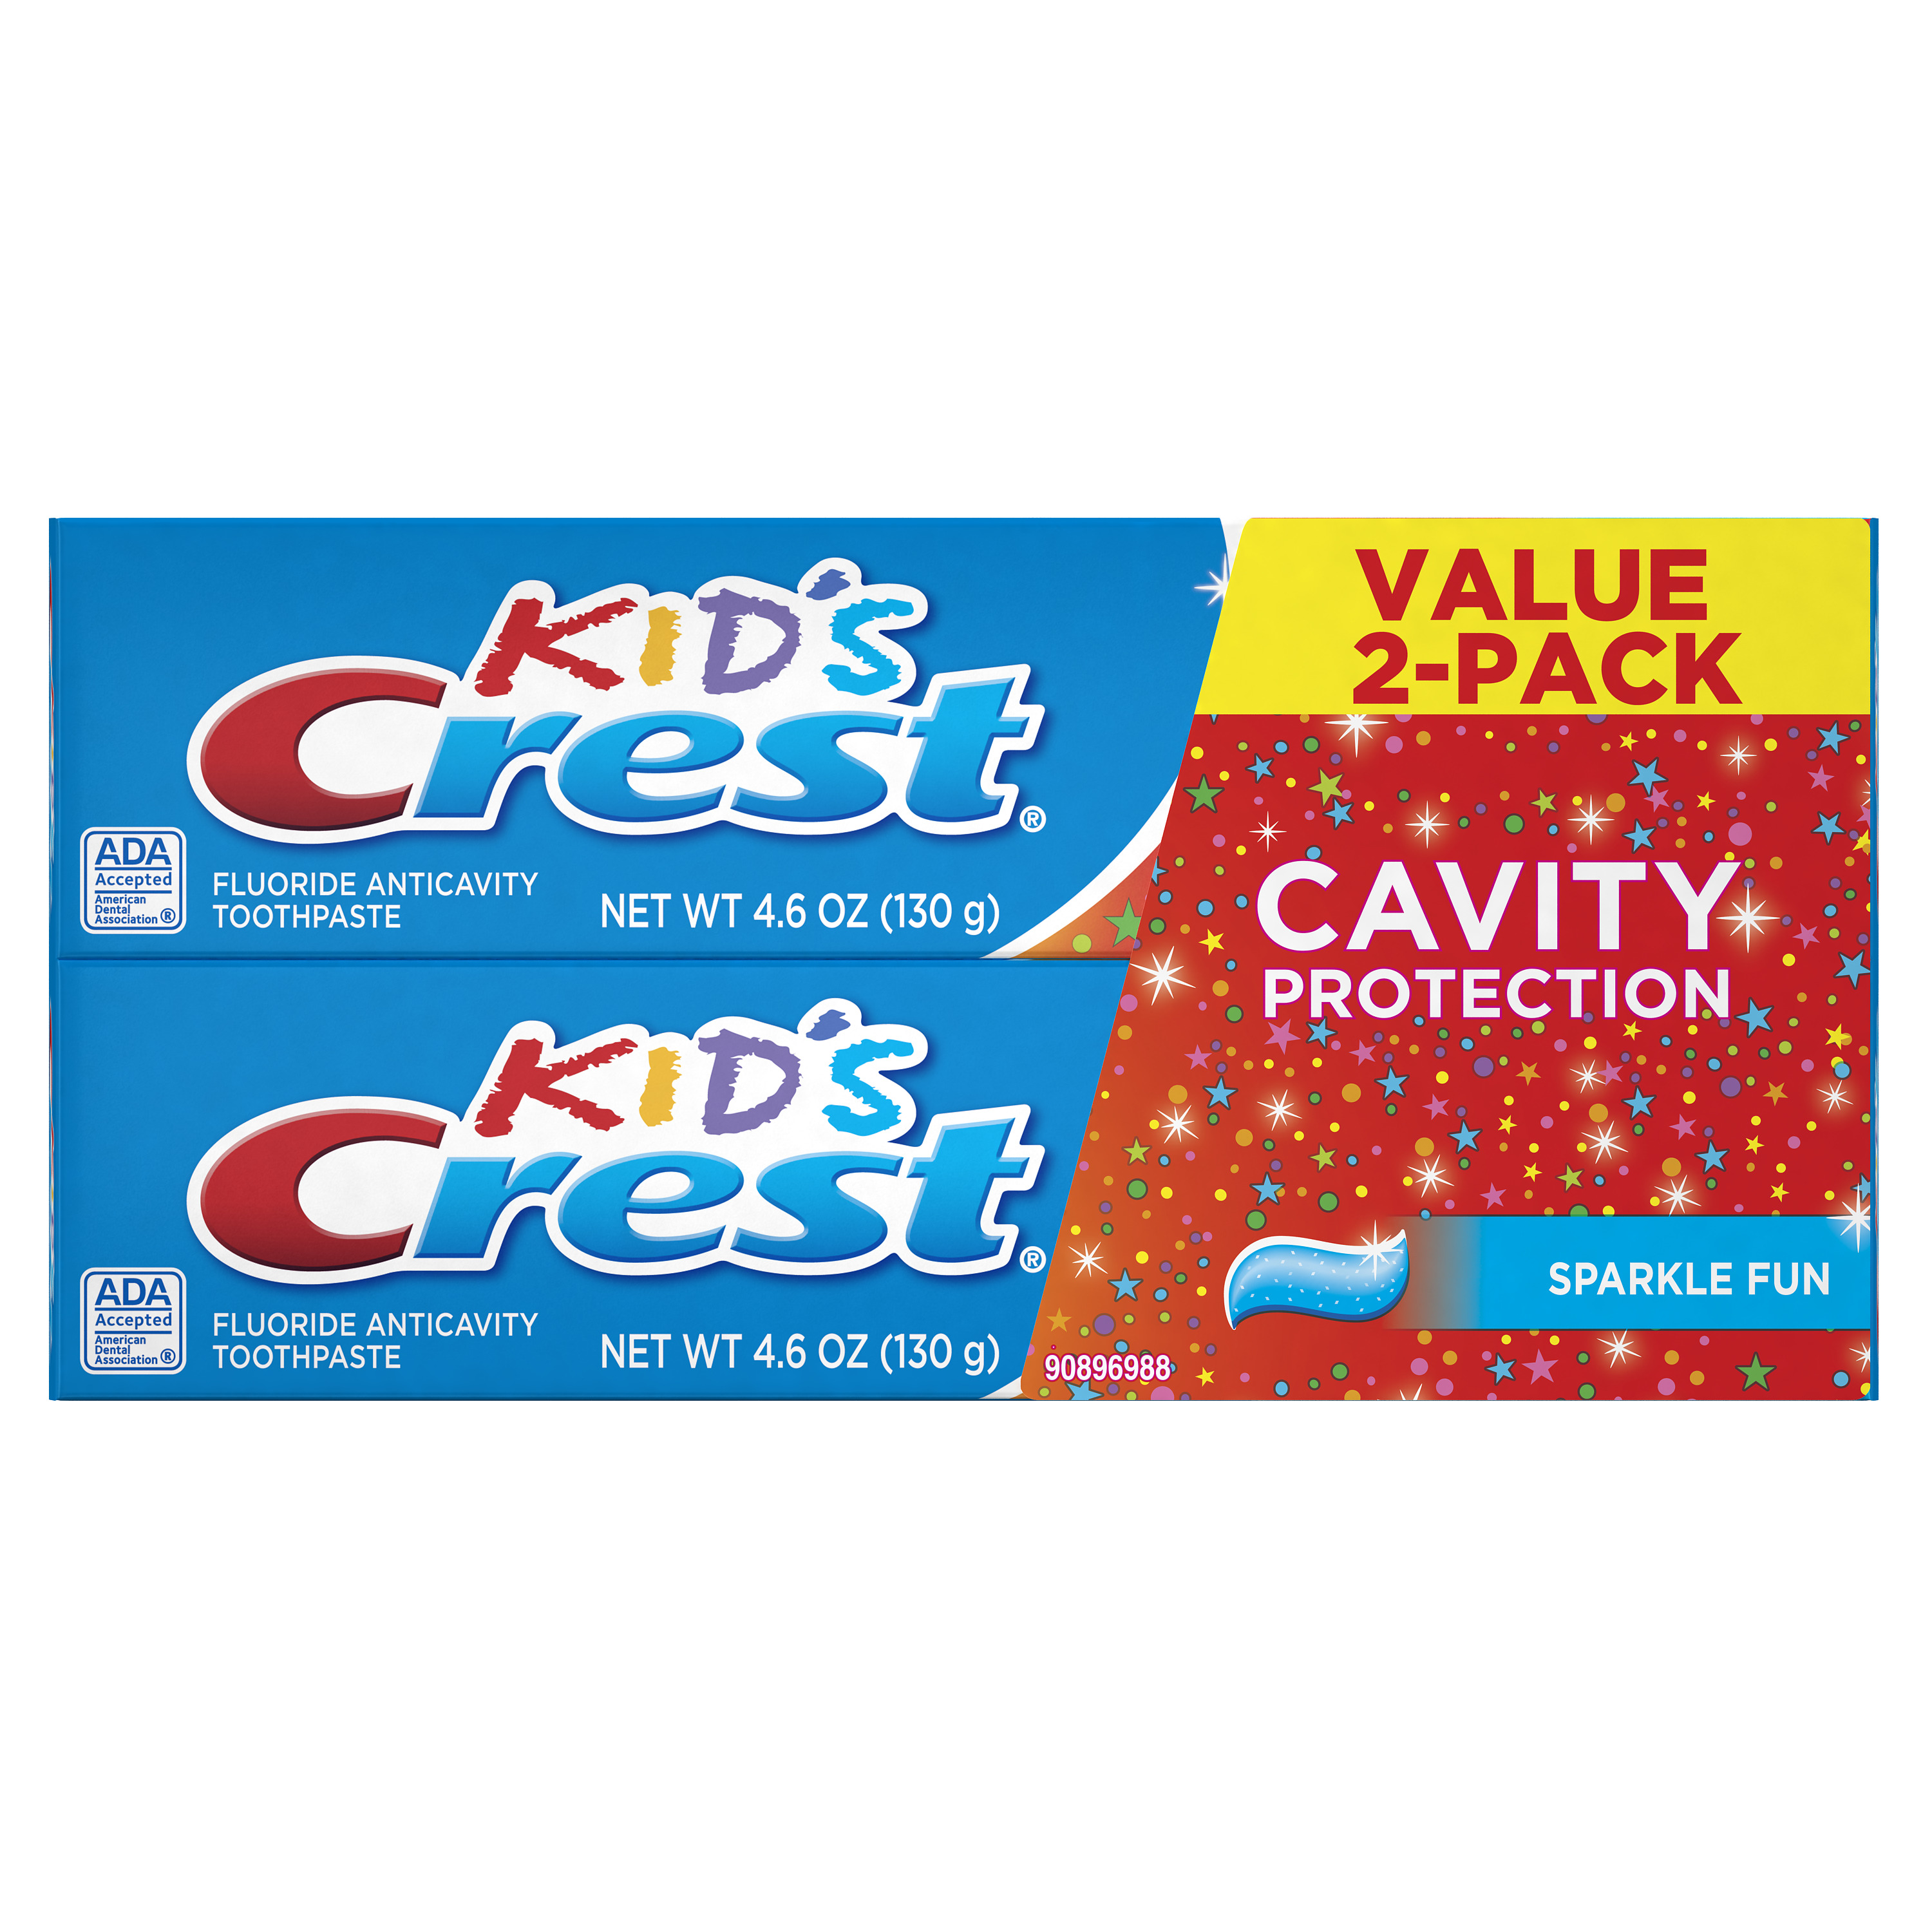 Crest Kid's Cavity Protection Toothpaste, Sparkle Fun Flavor, 4.6 oz, 2 Pack - image 1 of 7